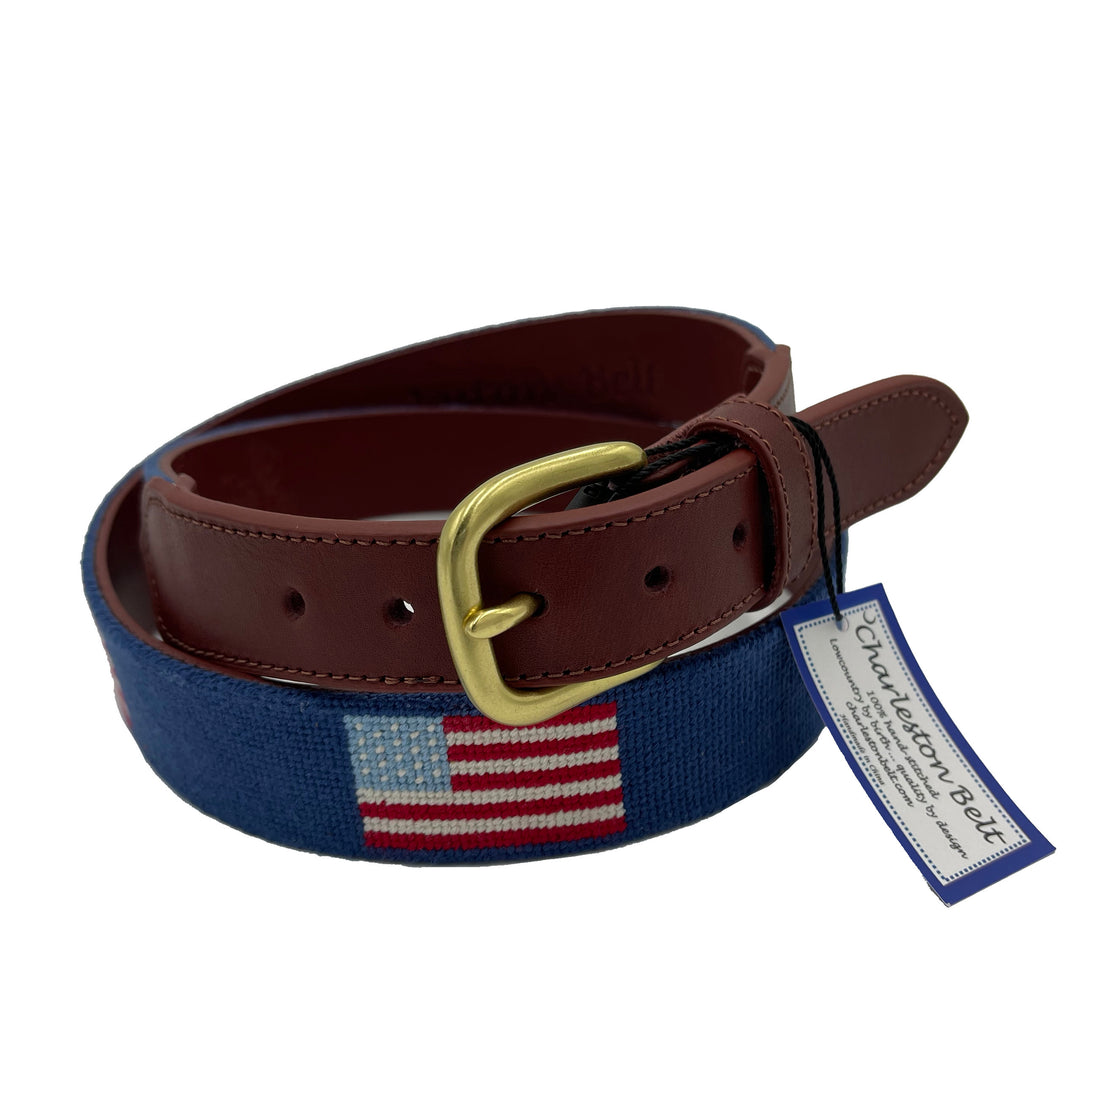 You'll love our American flag design!